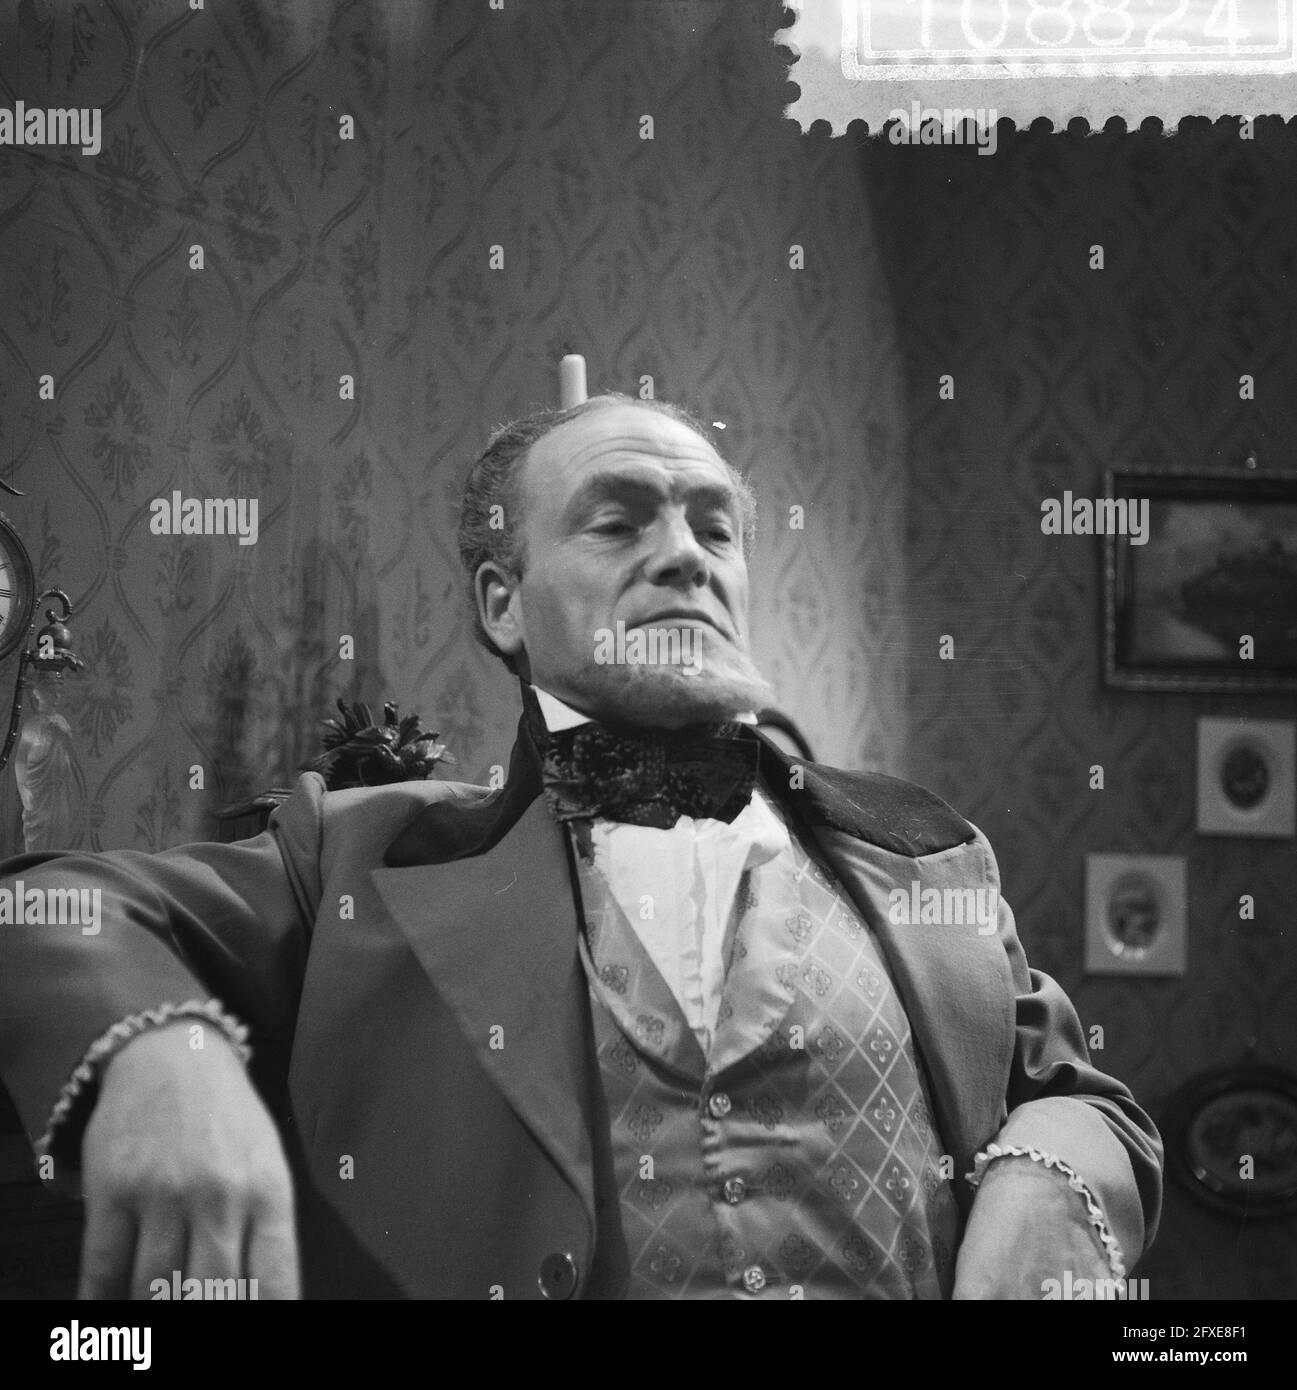 Television play The Heiress, Max Croiset as Dr. Austin Sloper, December 16, 1959, actors, television plays, The Netherlands, 20th century press agency photo, news to remember, documentary, historic photography 1945-1990, visual stories, human history of the Twentieth Century, capturing moments in time Stock Photo